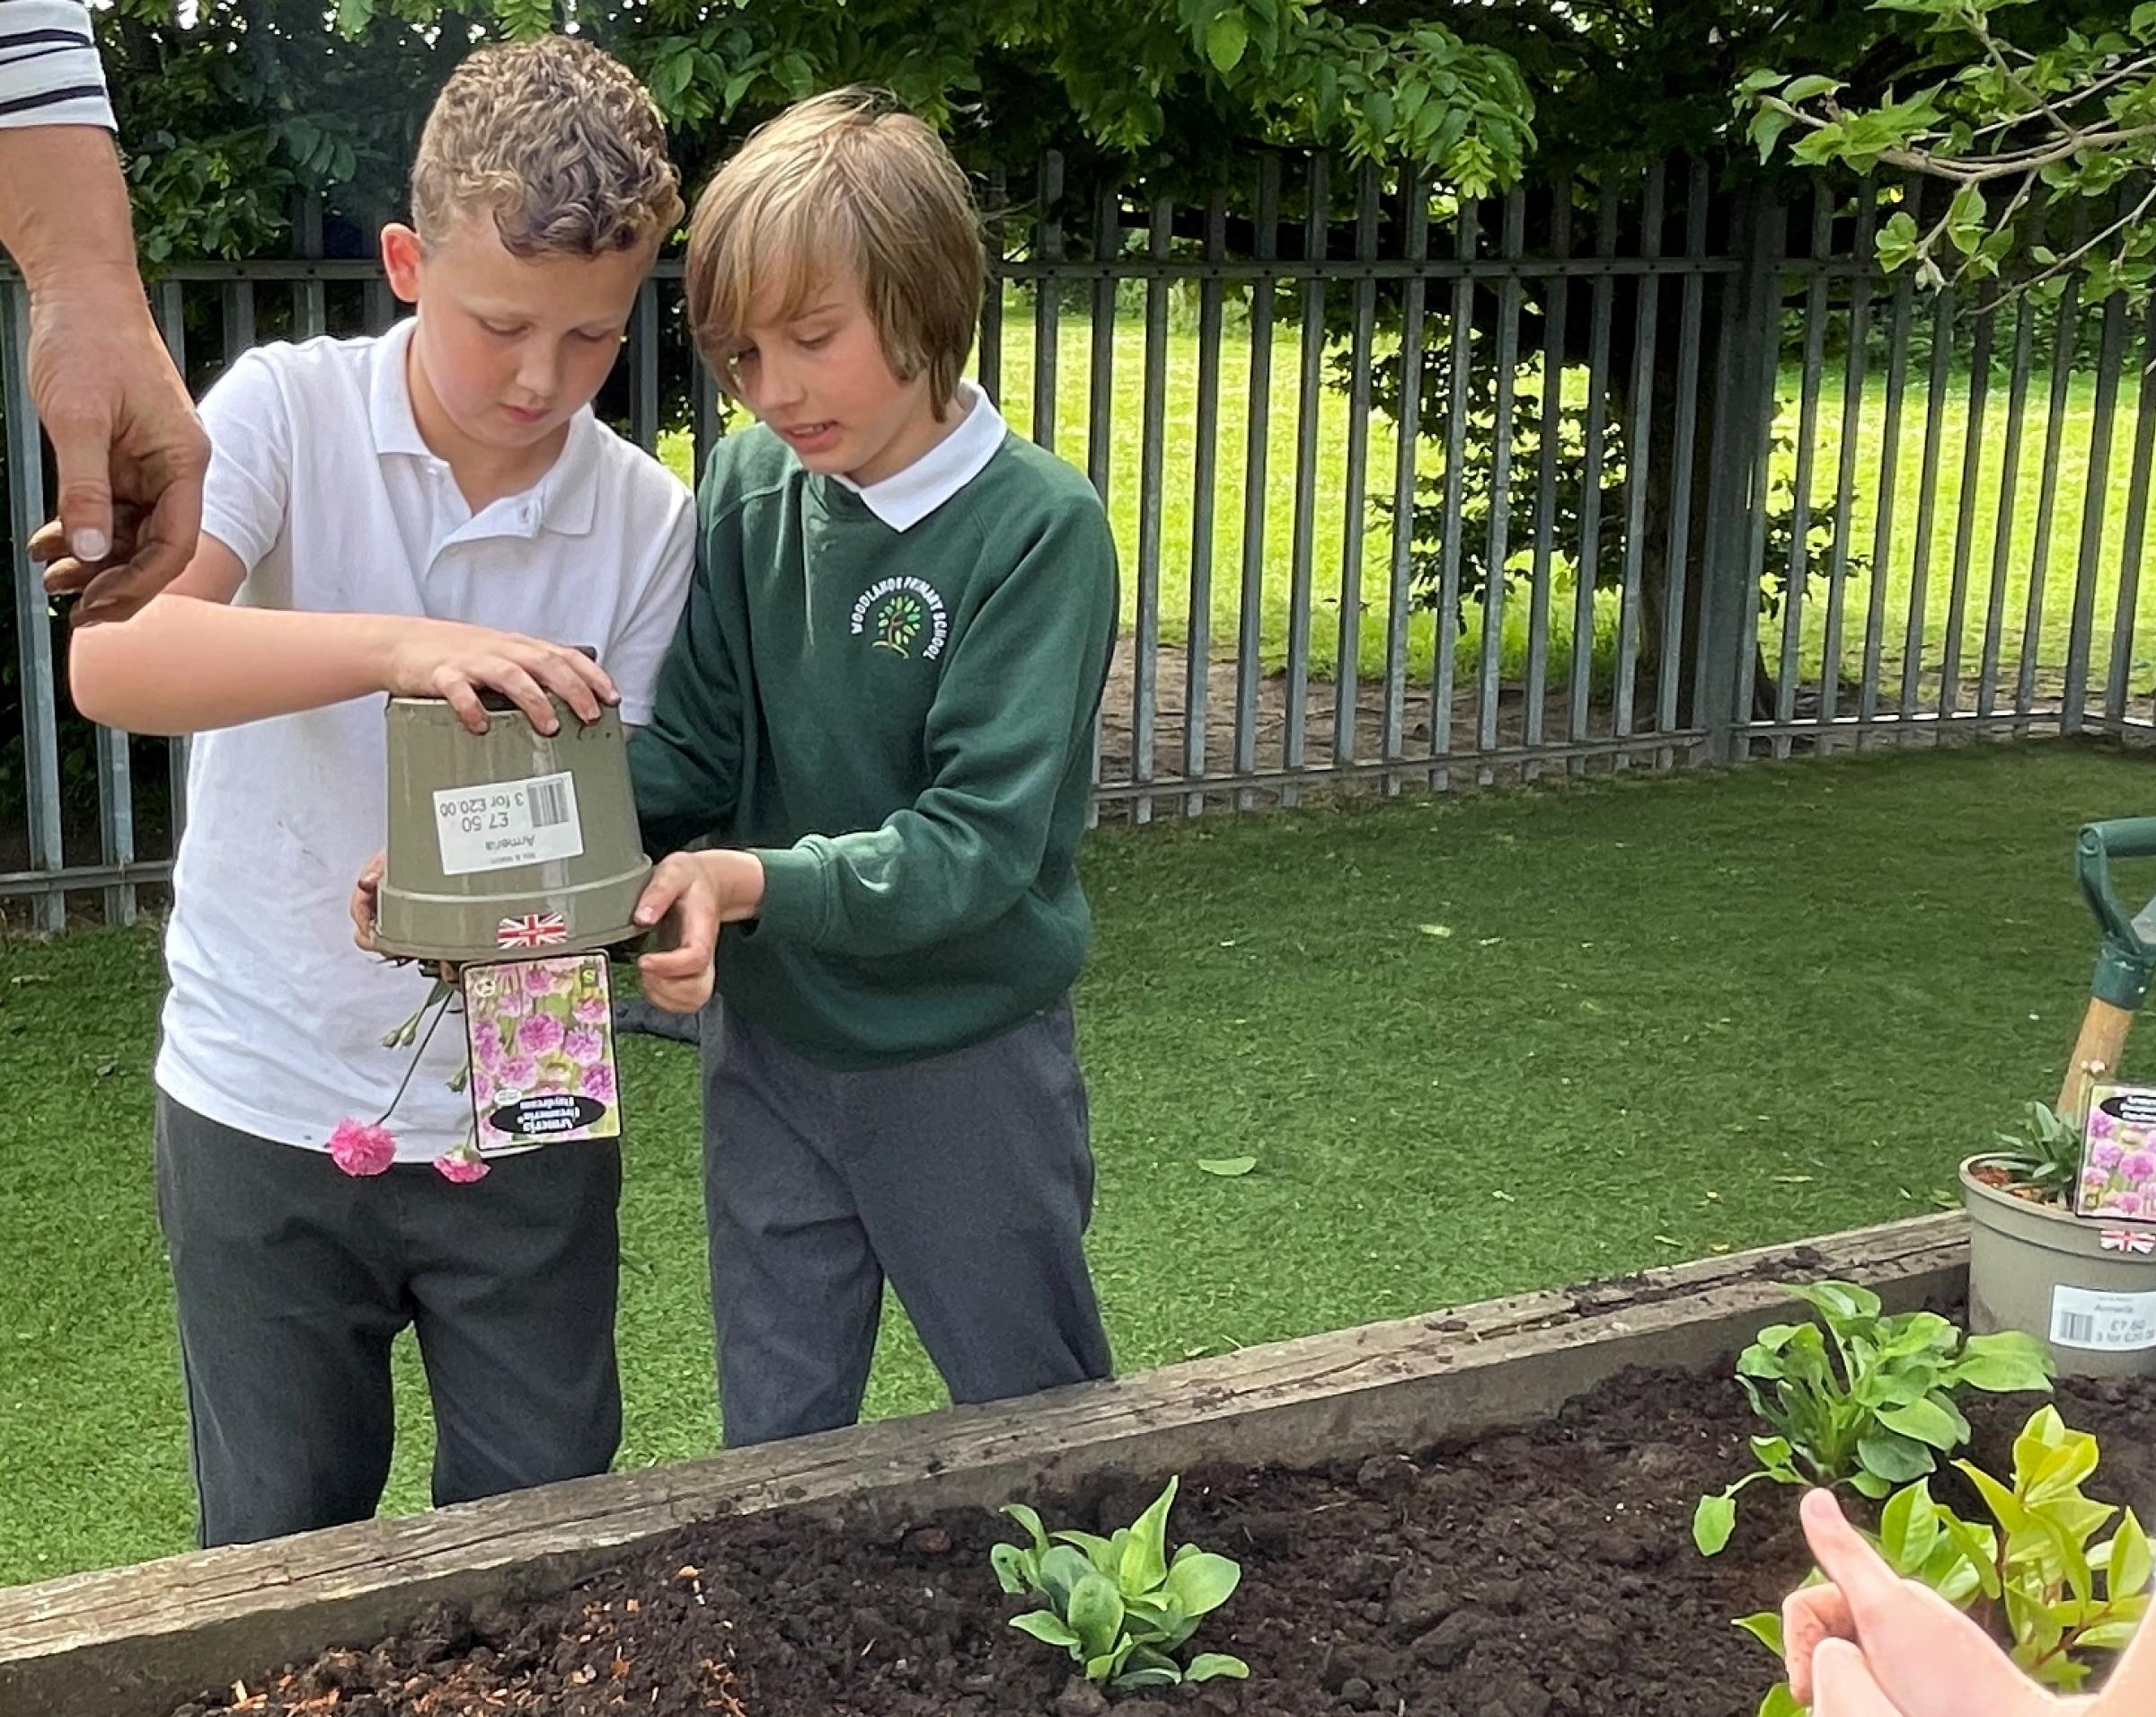 Woodlands Primary School pupils get involved in the planting.